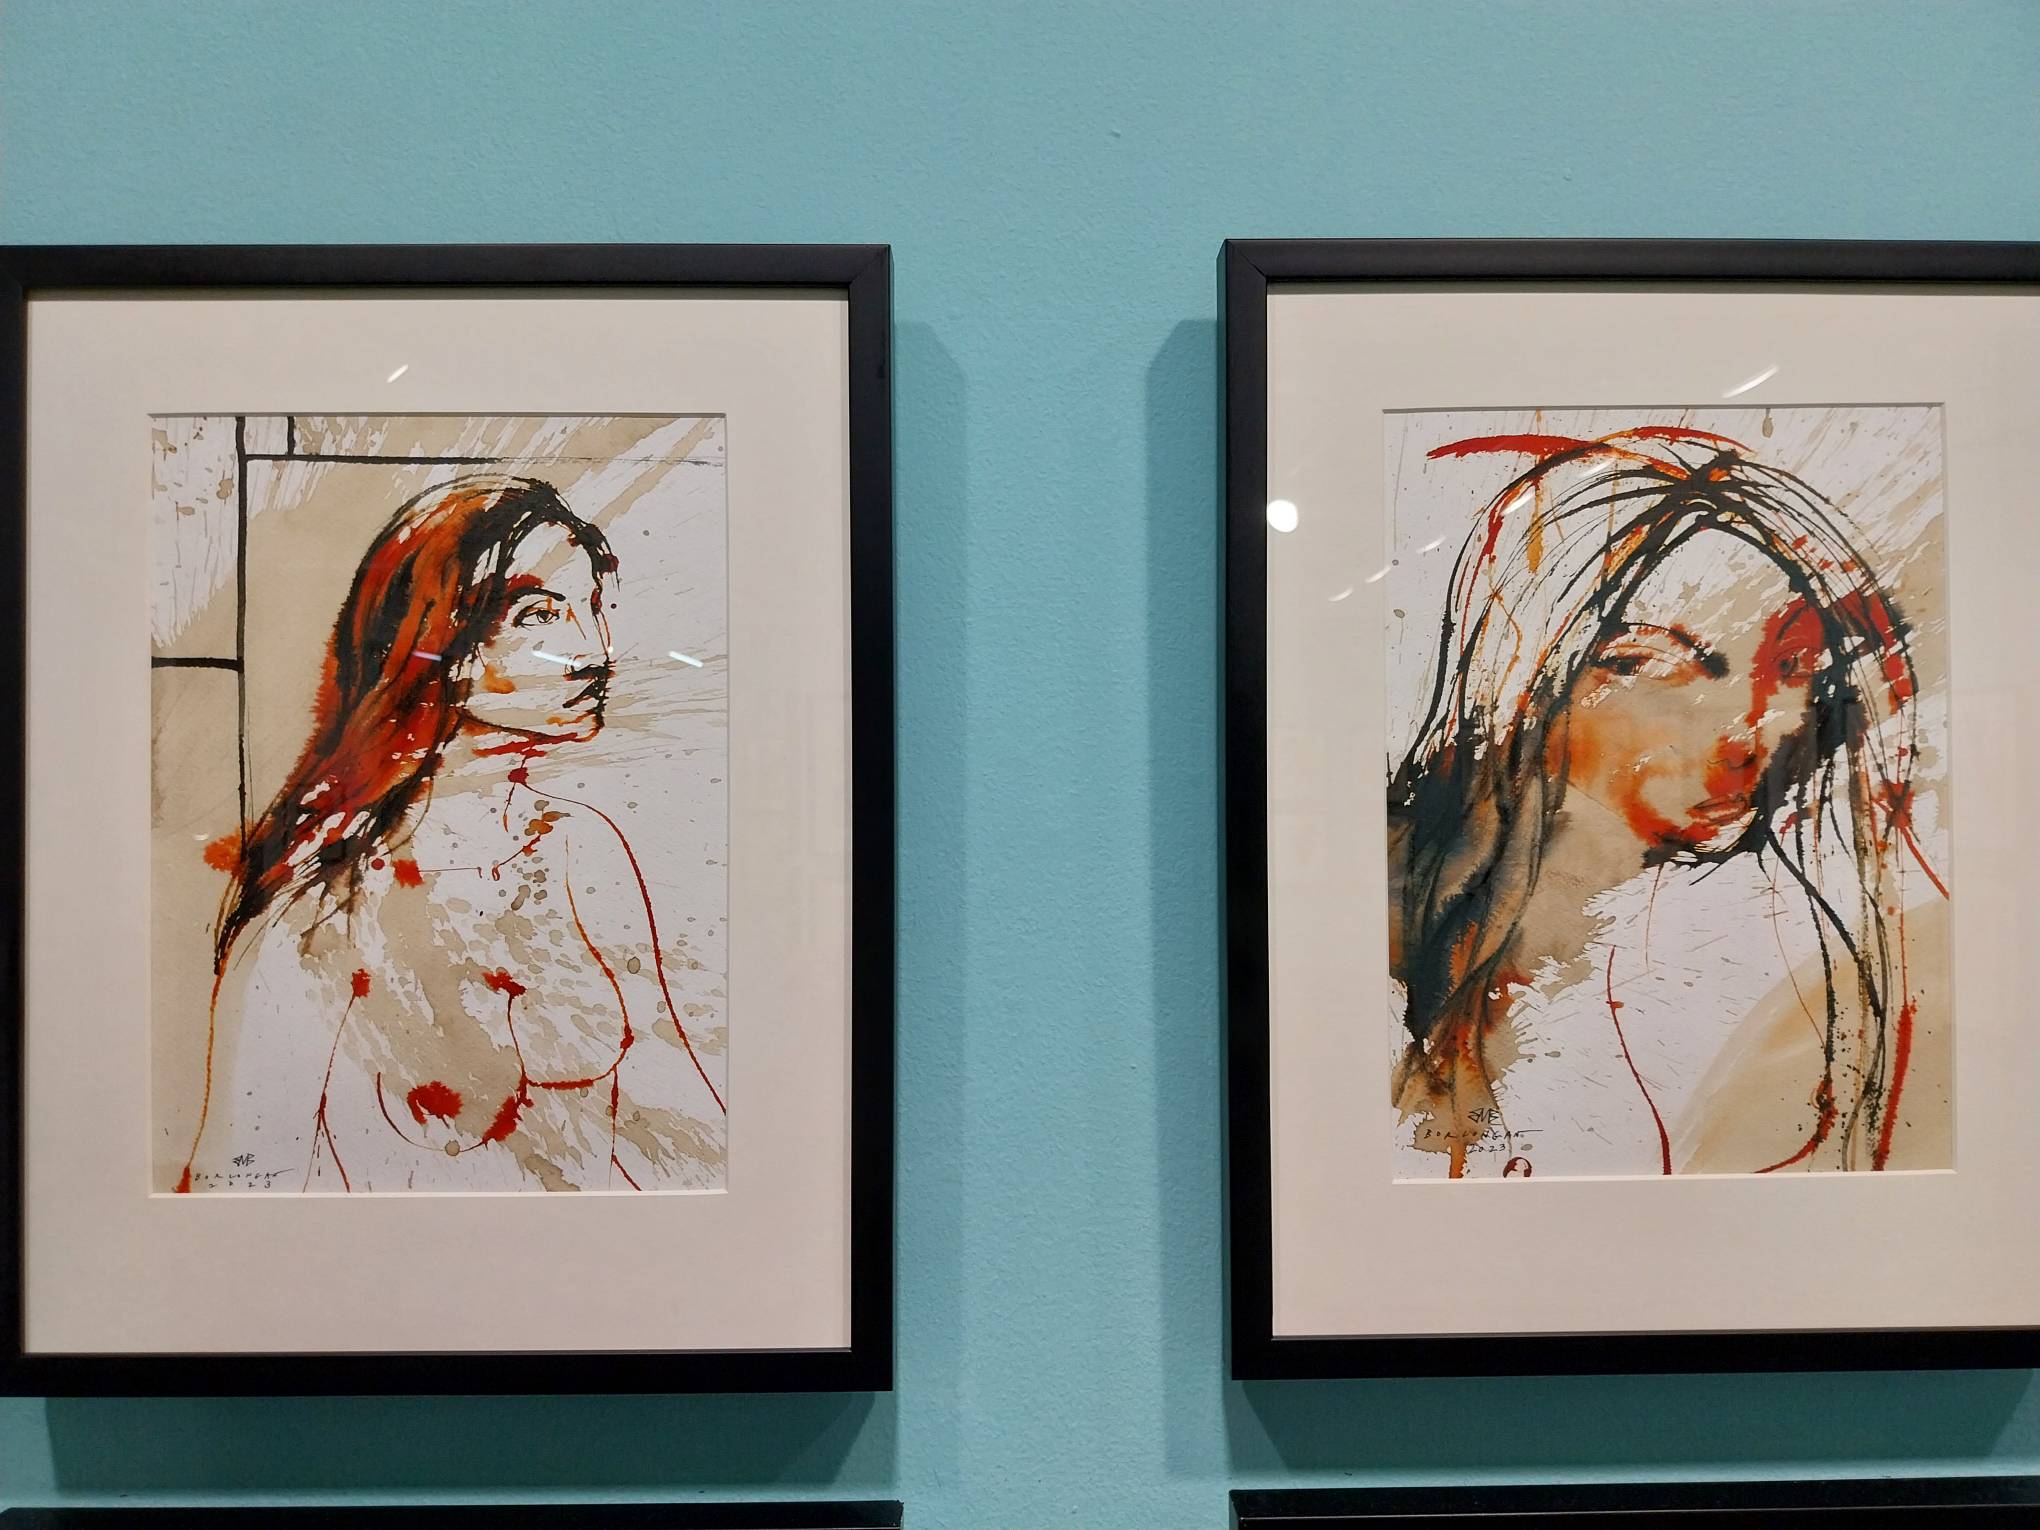 Two paintings by Elmer Borlongan with one woman looking at another judgmentally. Photo by Elle Yap.